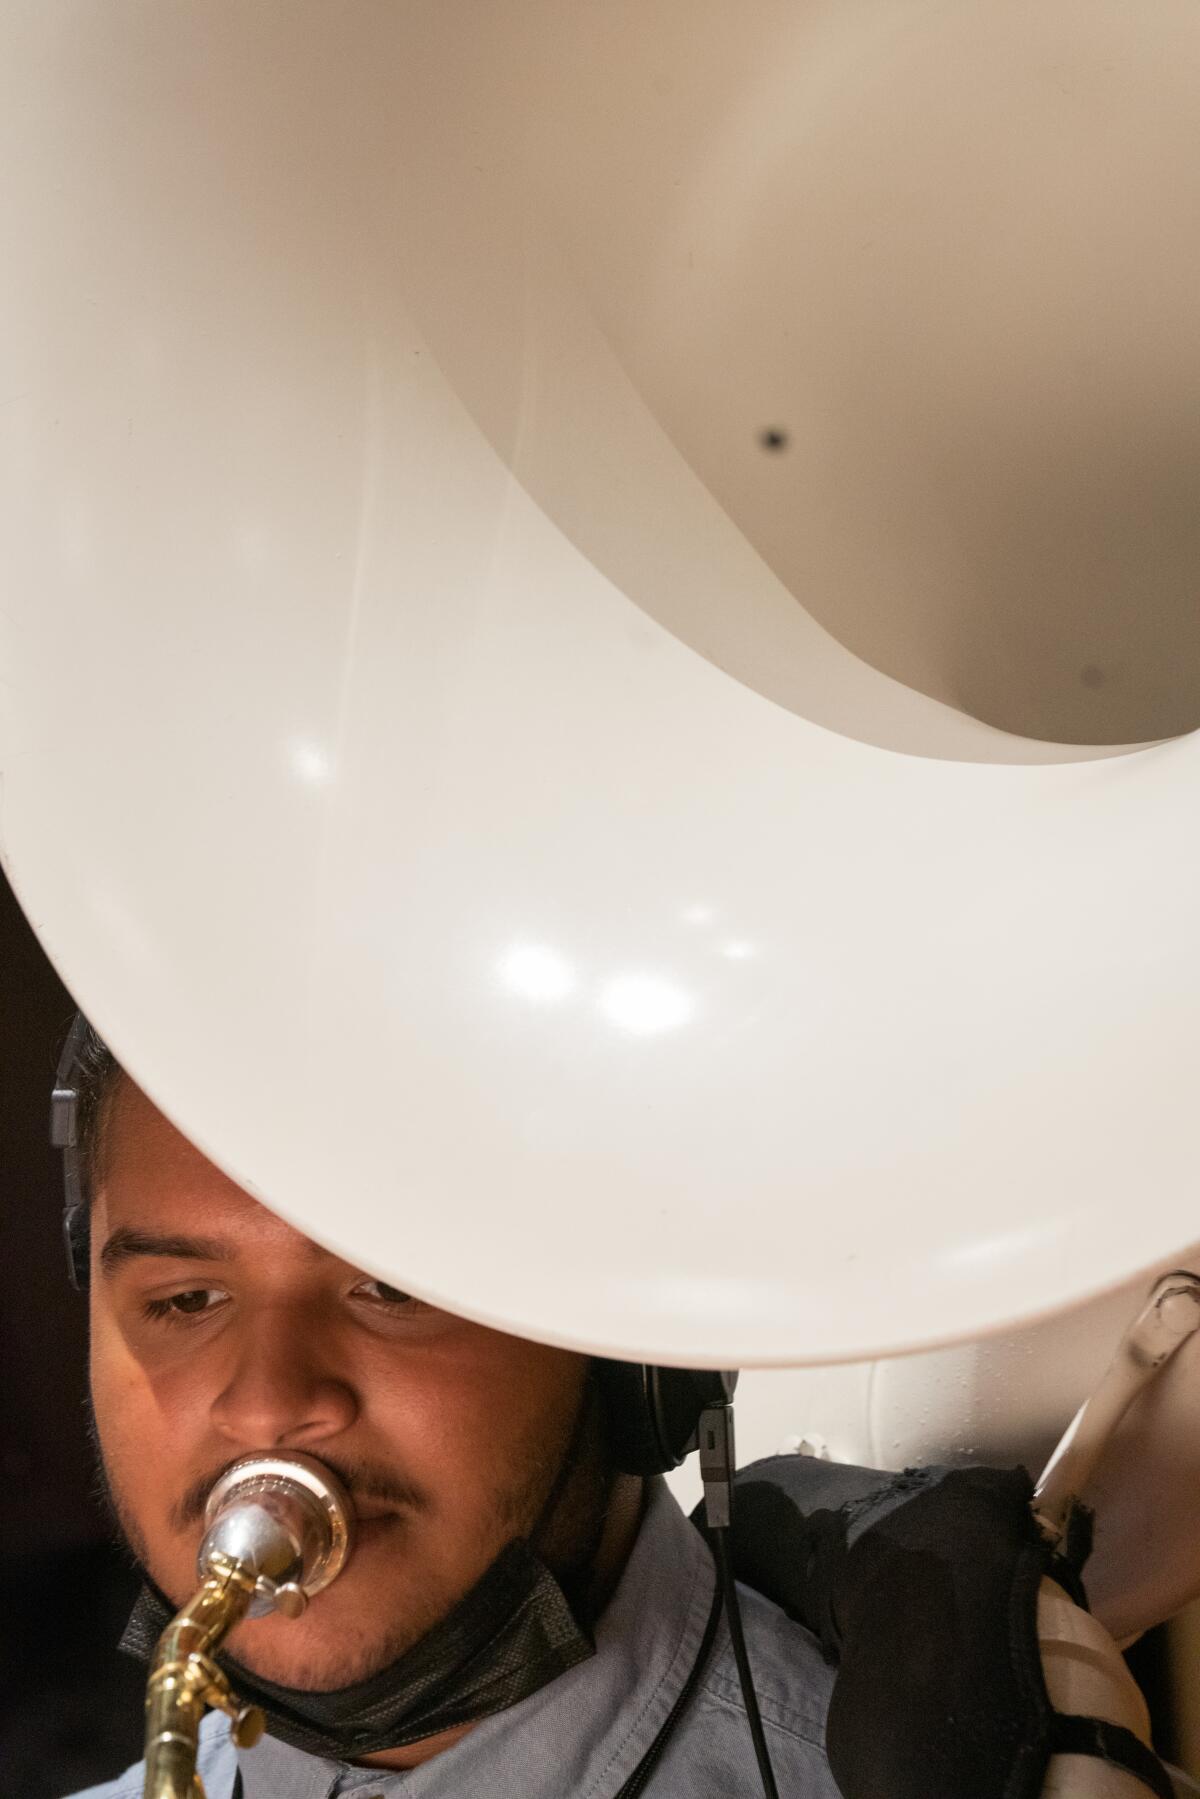 A teenager is seen in a close-up portrait playing the sousaphone.